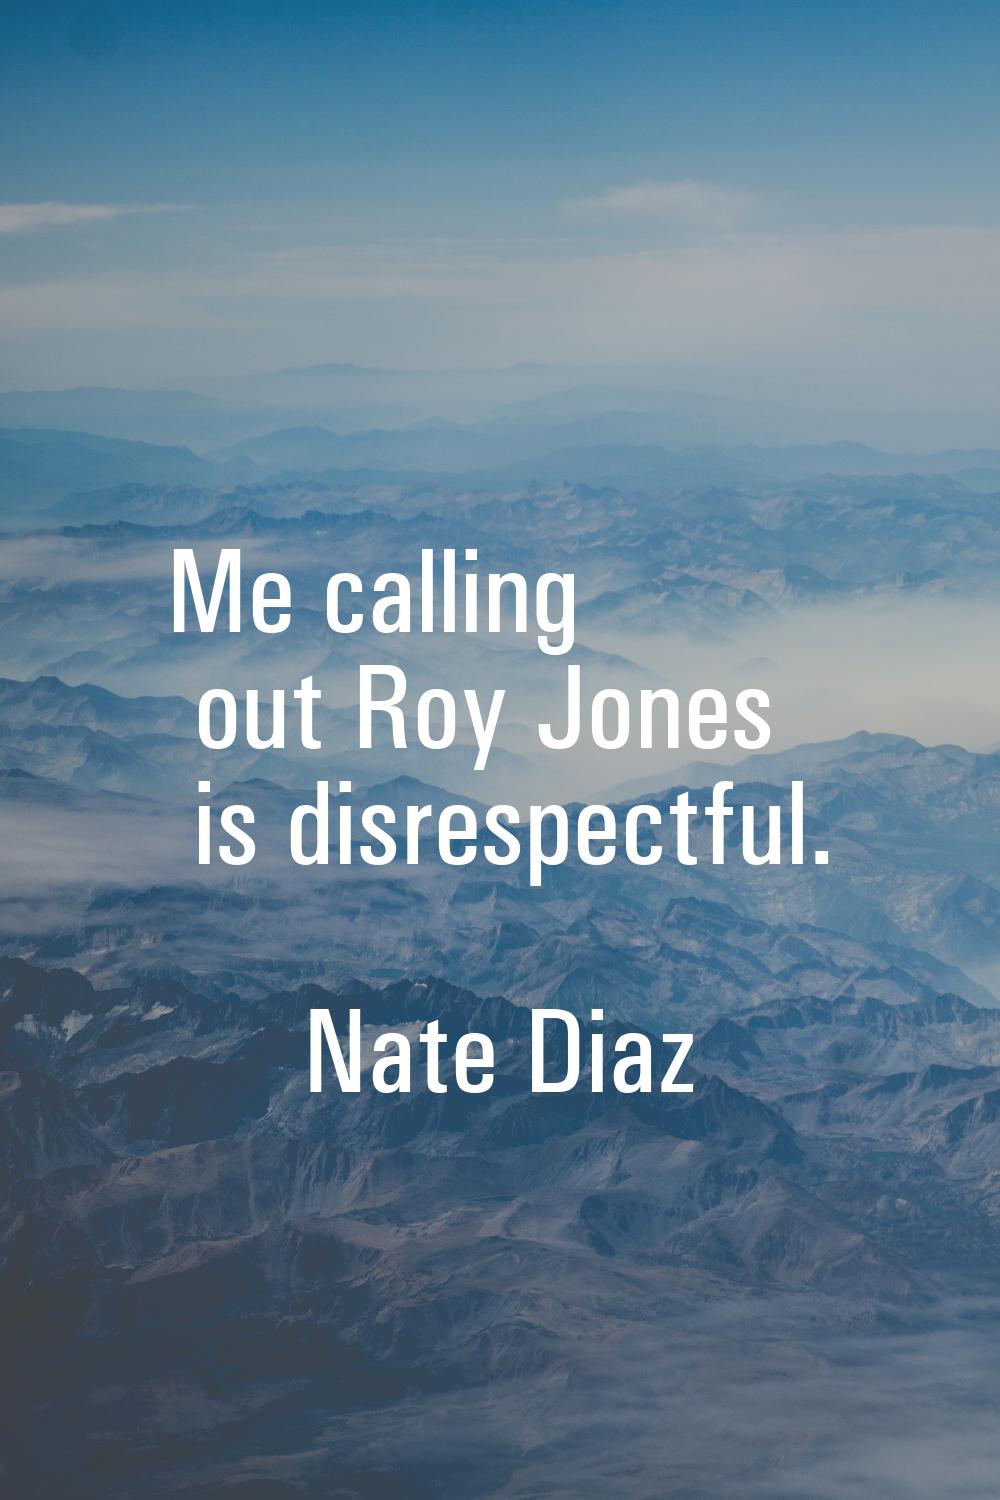 Me calling out Roy Jones is disrespectful.